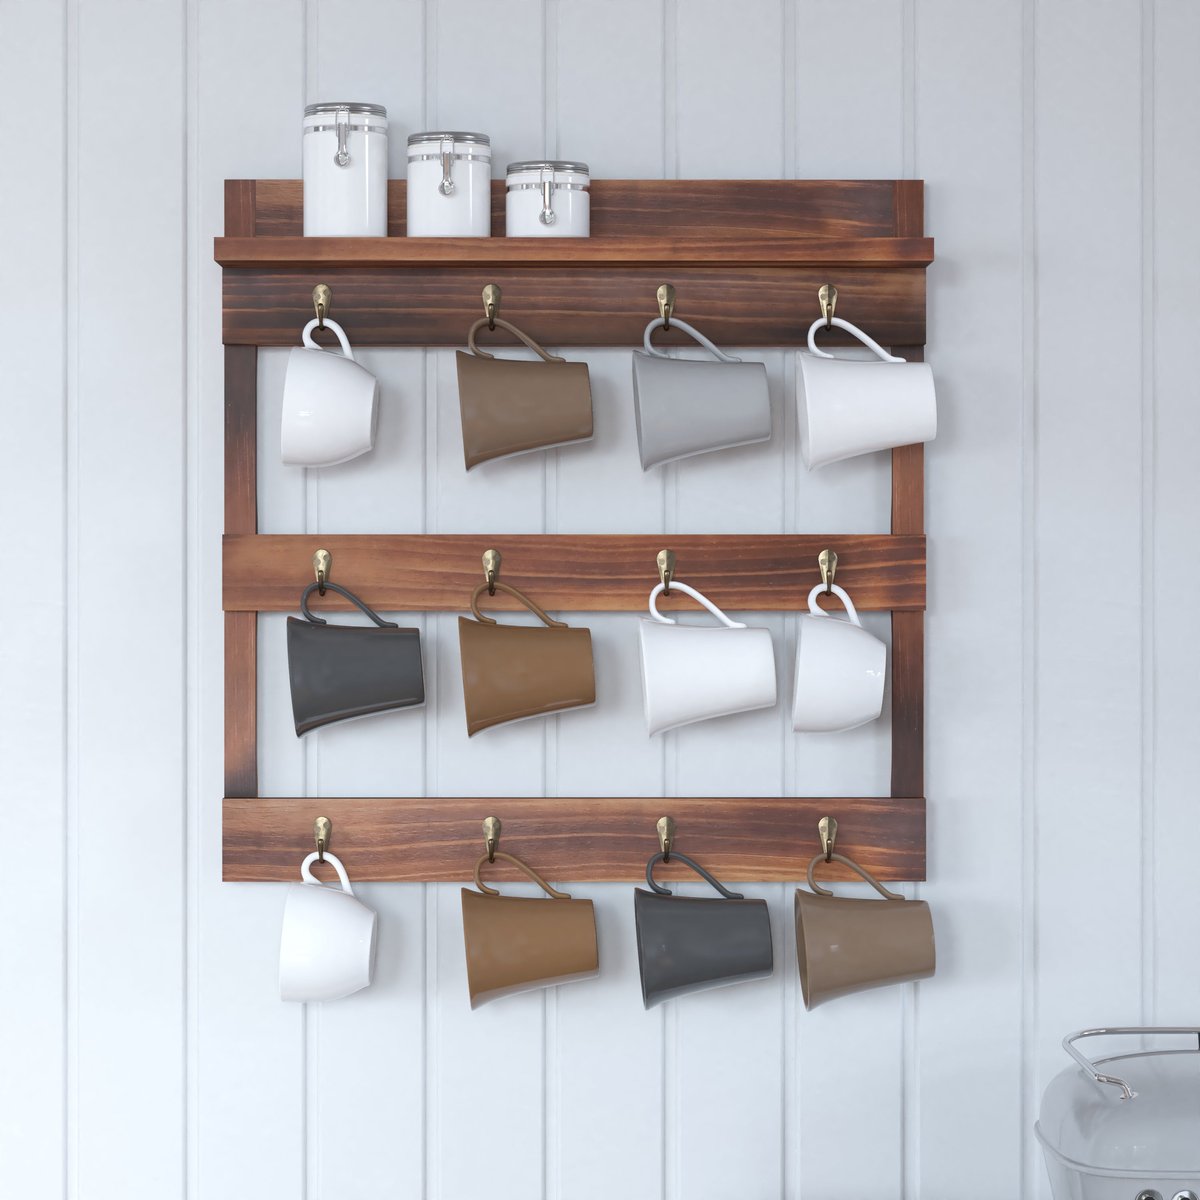 https://images.verishop.com/merrick-lane-steeley-wooden-wall-mount-12-cup-mug-rack-organizer-with-upper-storage-shelf-and-metal-hanging-hooks-with-no-assembly-required-rustic-brown/M00196861037719-3696773085?auto=format&cs=strip&fit=max&w=1200